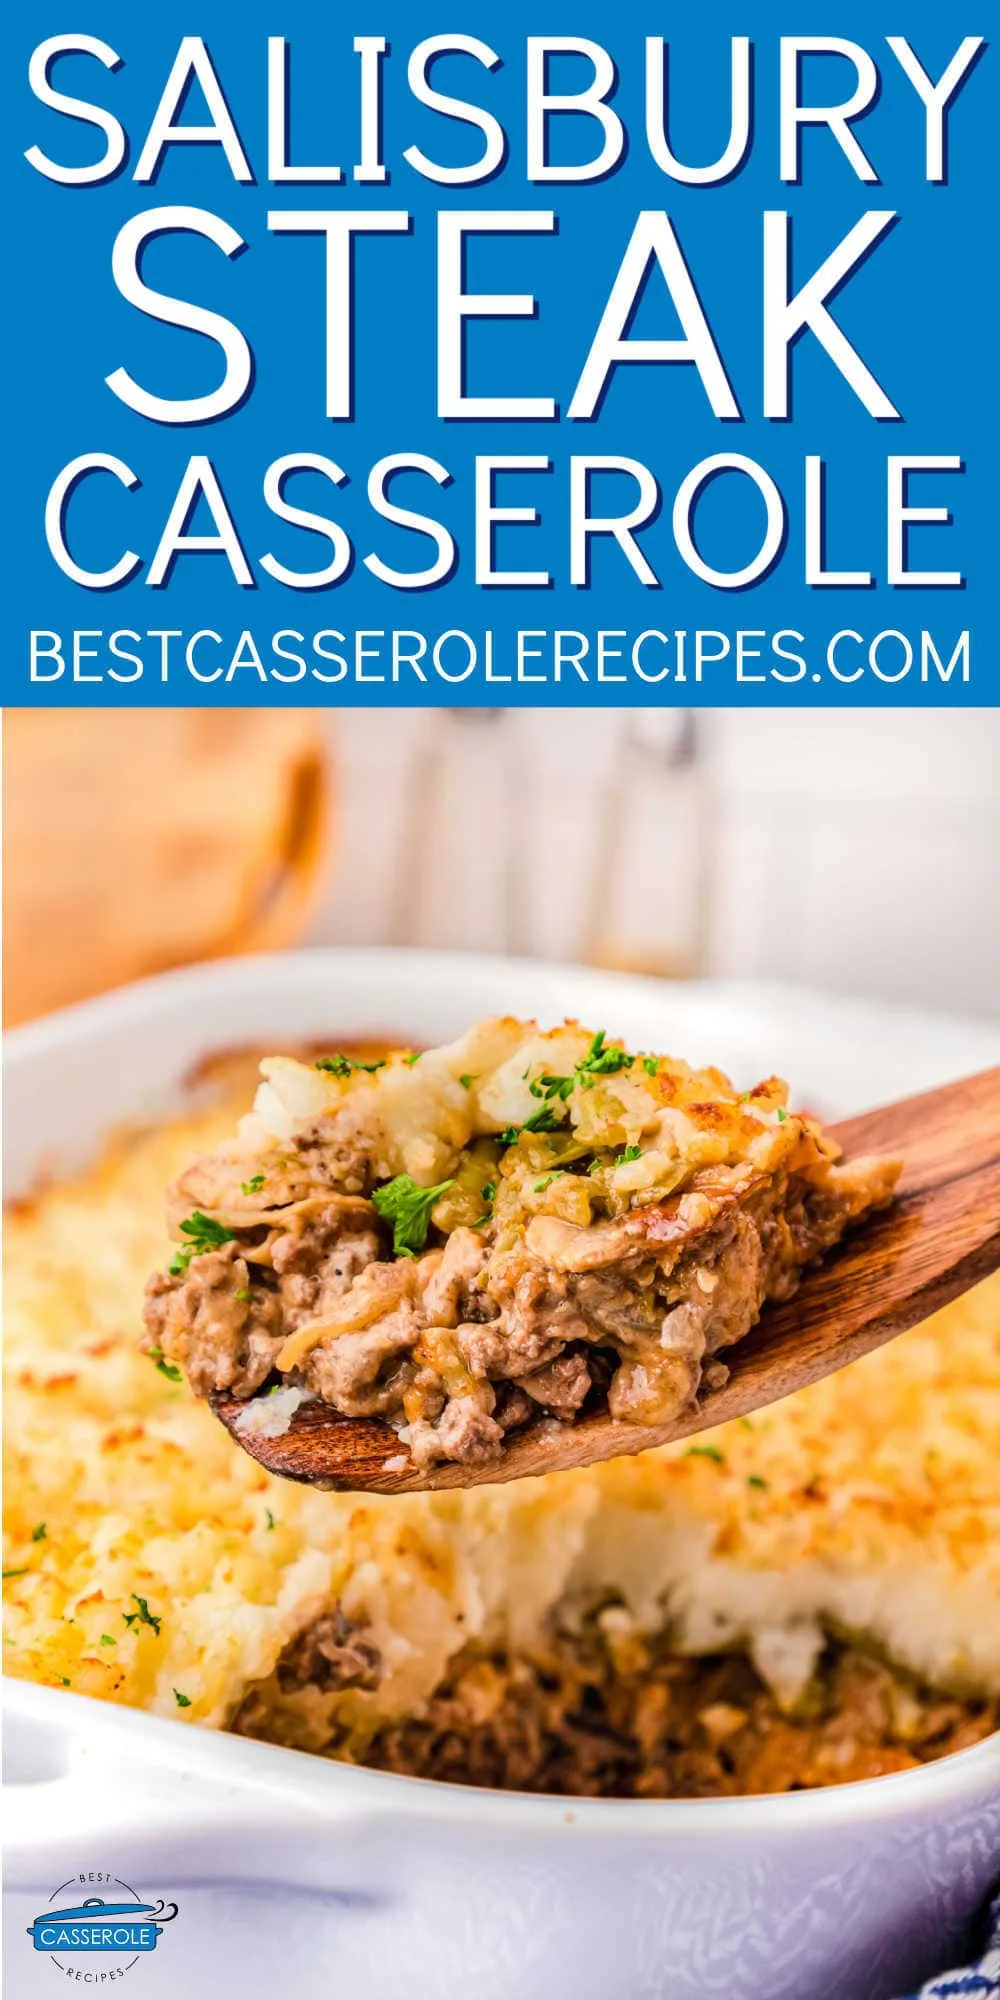 salisbury steak casserole is easy dinner recipes with a title banner